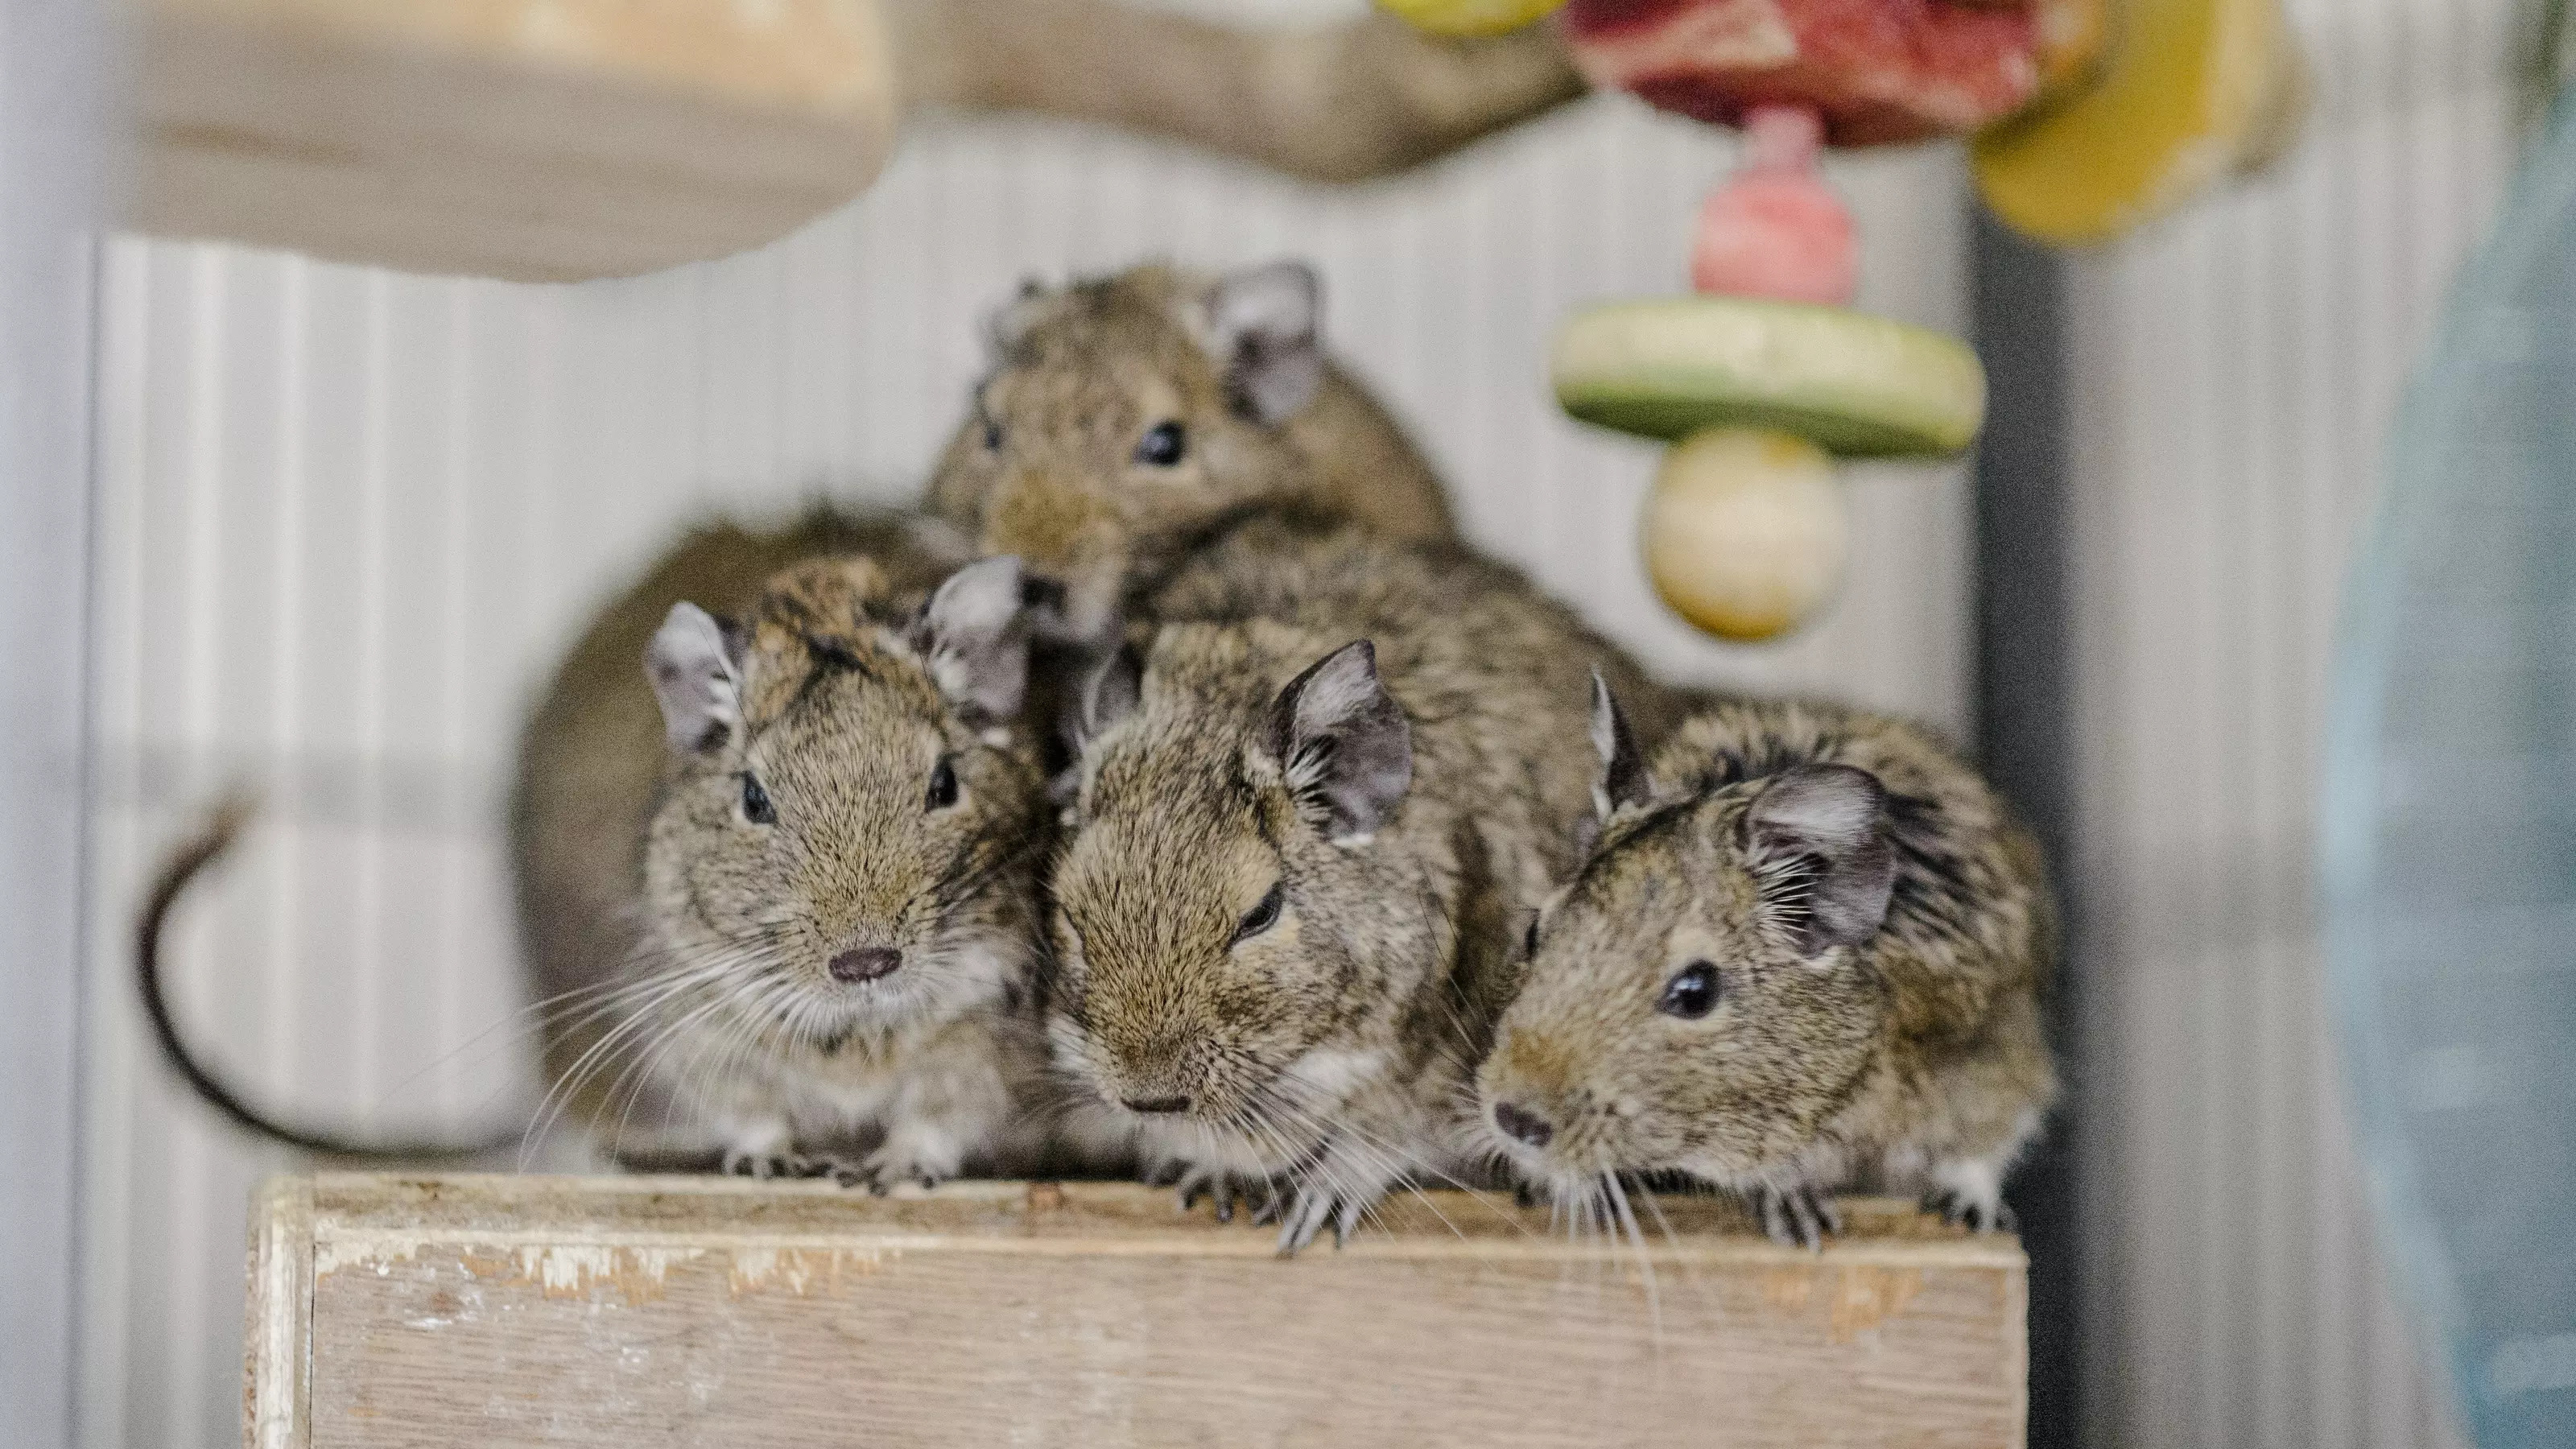 Four degus huddle together on a wooden box in their accommodation.